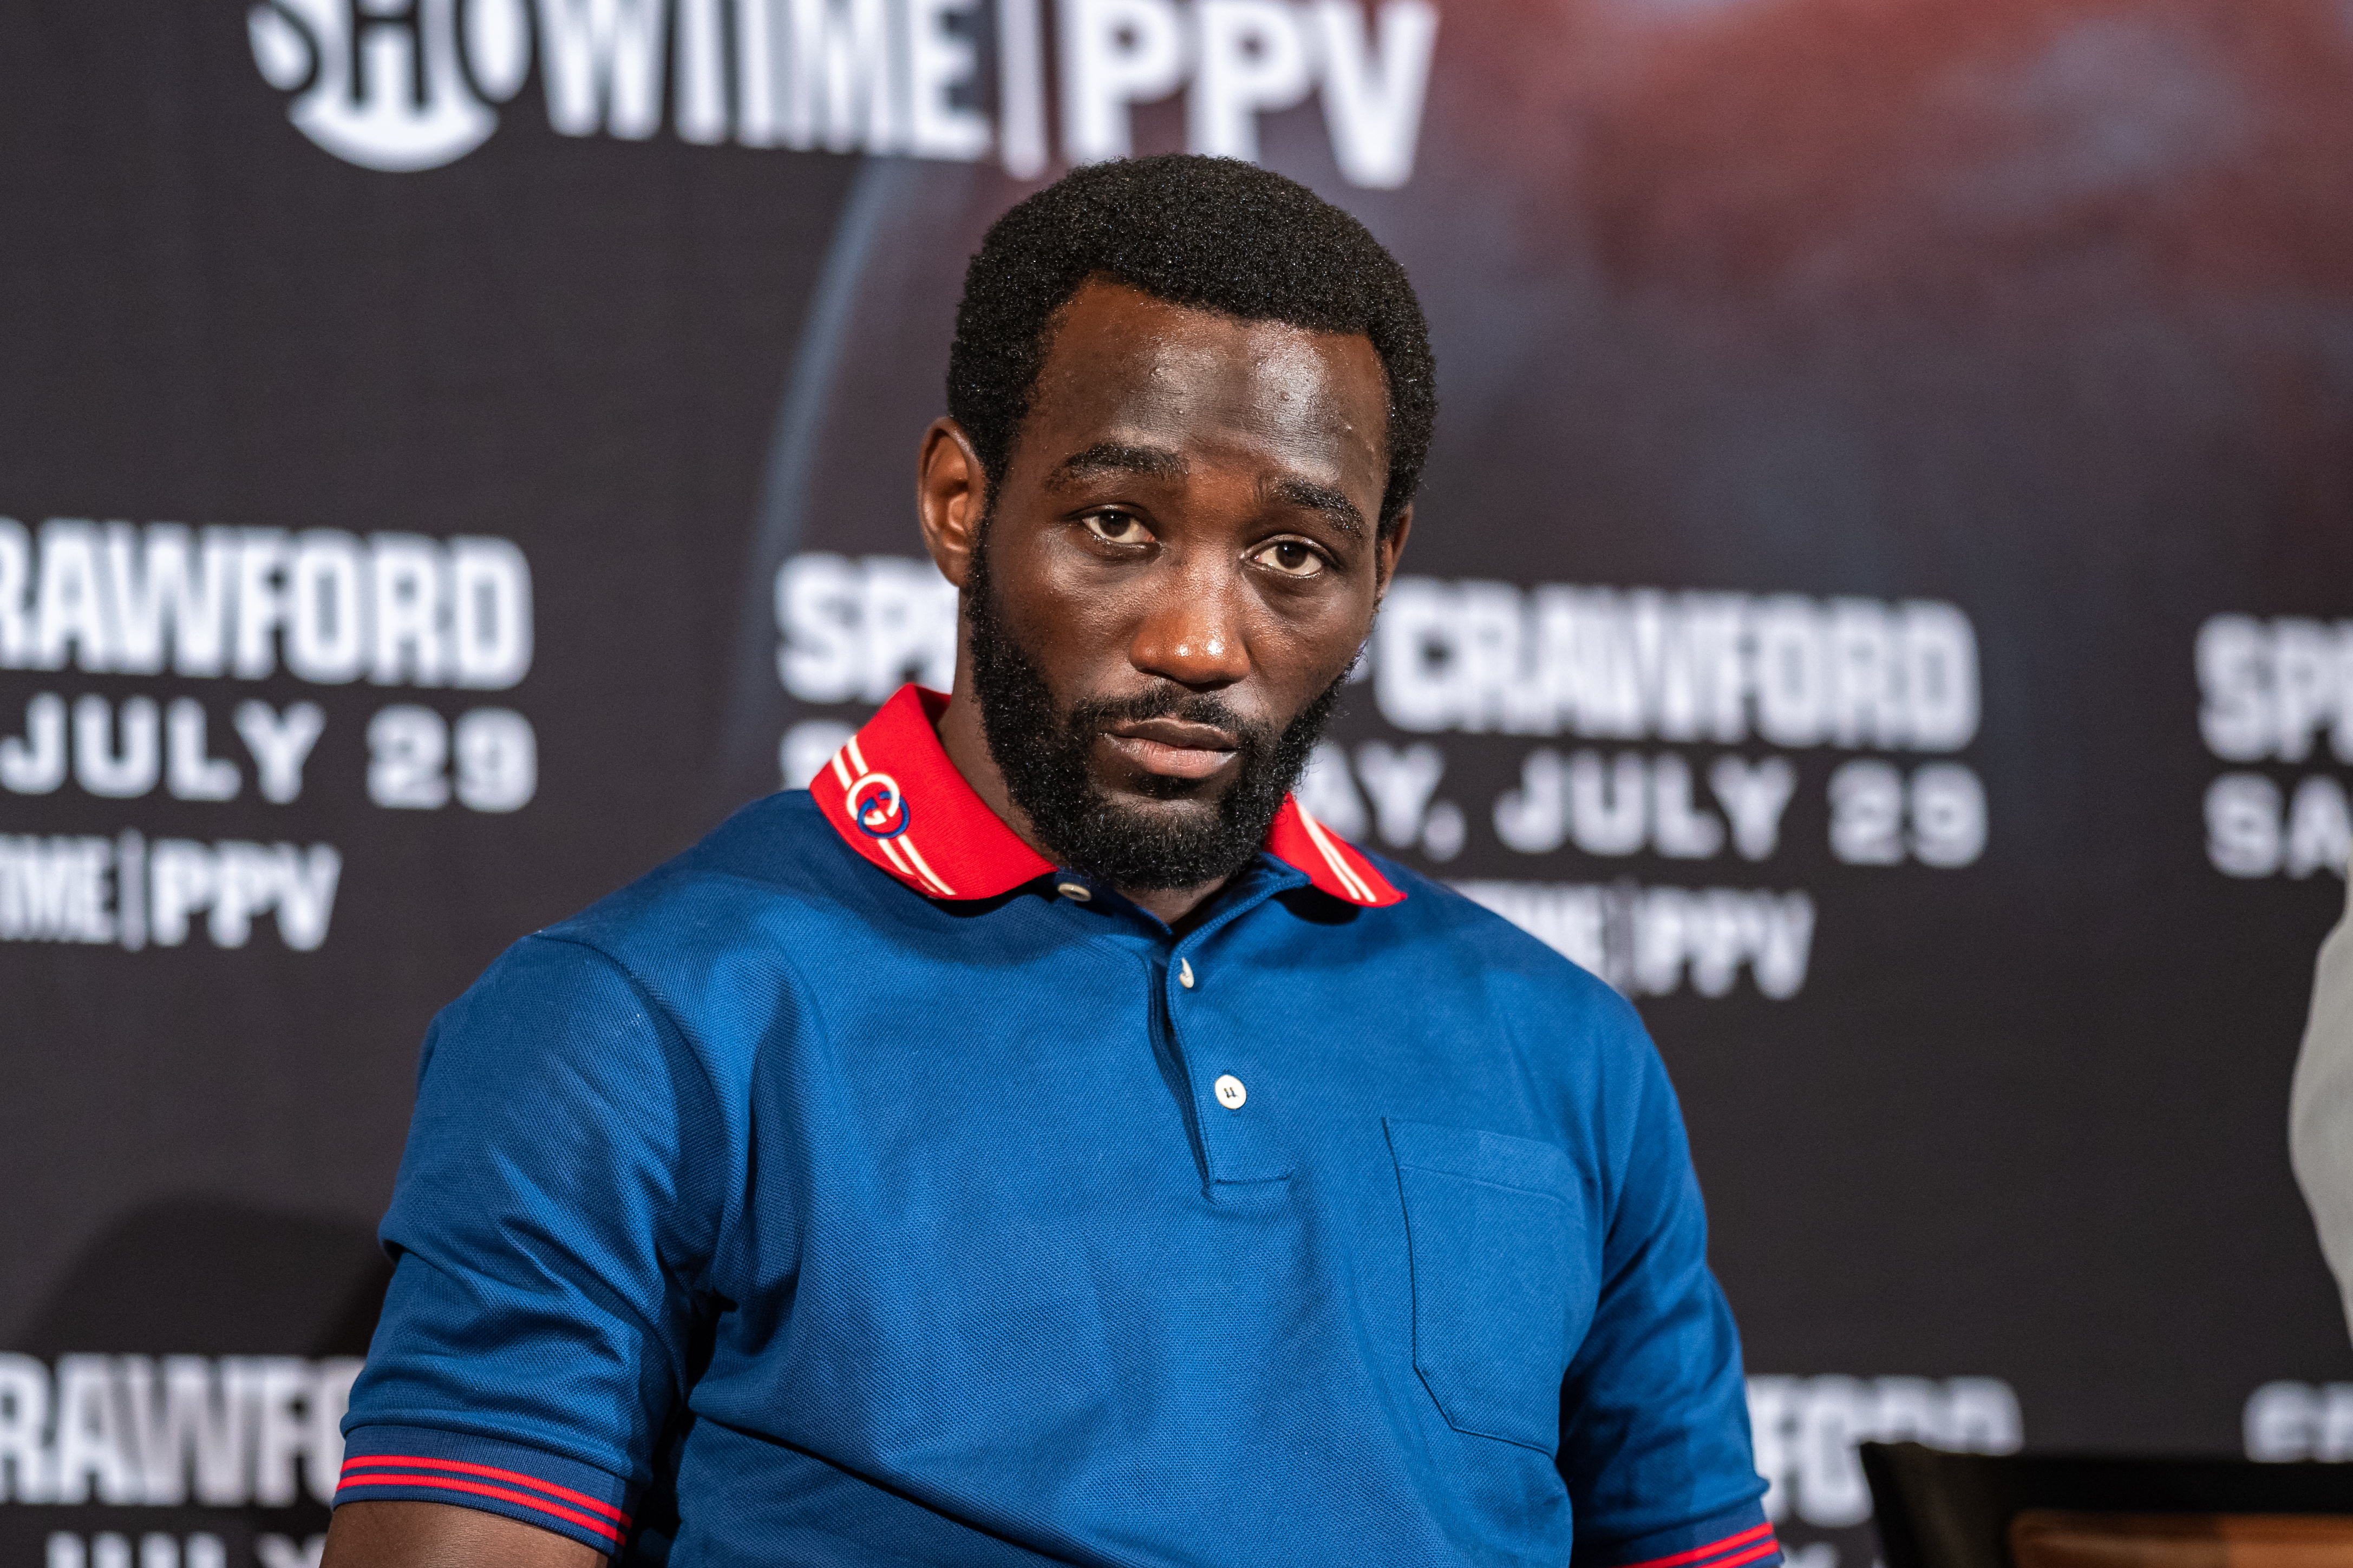 Crawford: All I am going to say is ‘I told you so’